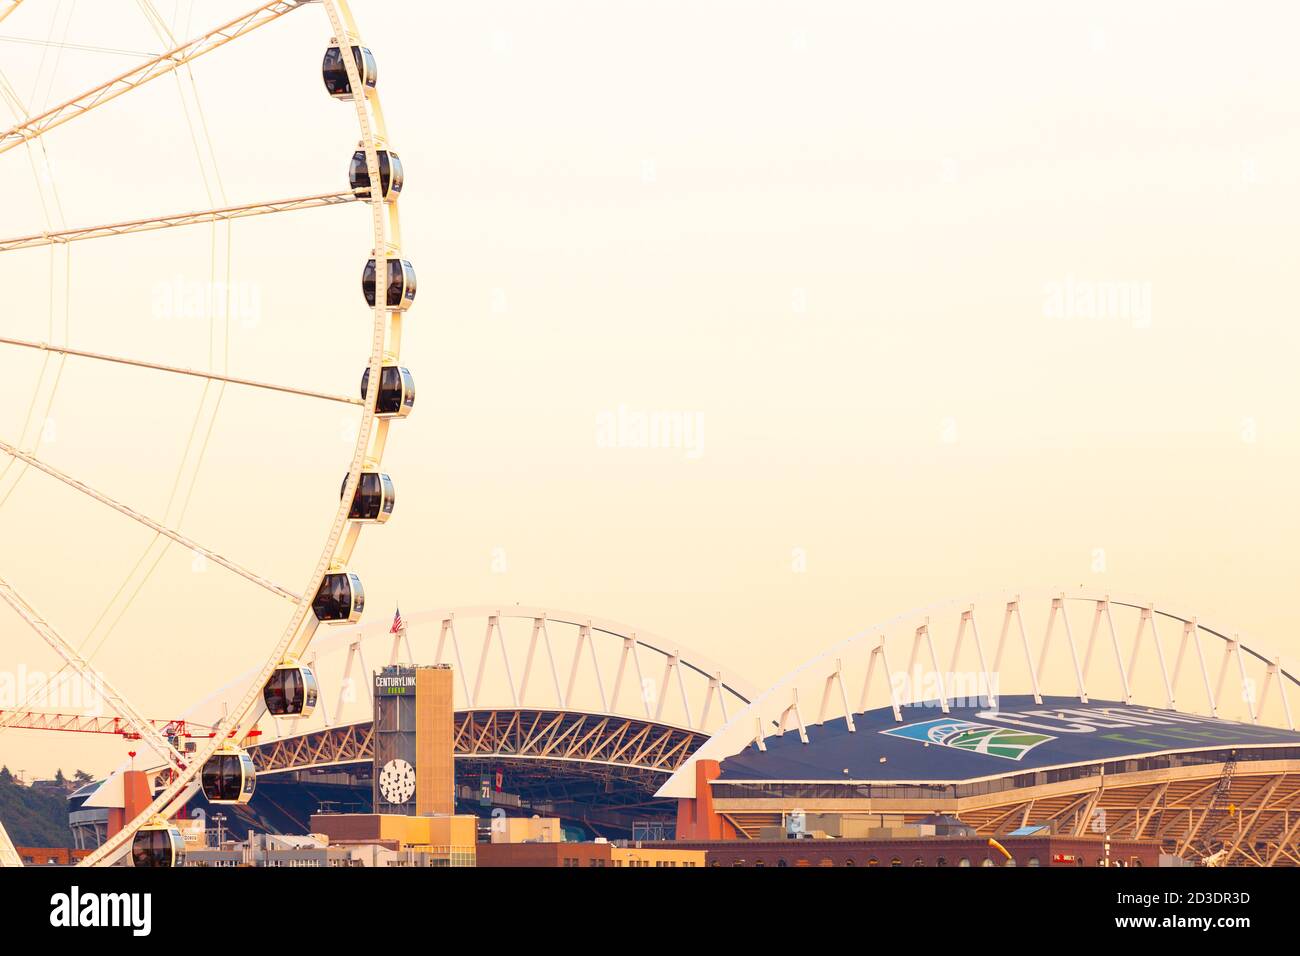 Seattle, Washington State, United States - Centurylink Field sports stadium at Pioneer Square district and Seattle Great Wheel. Stock Photo